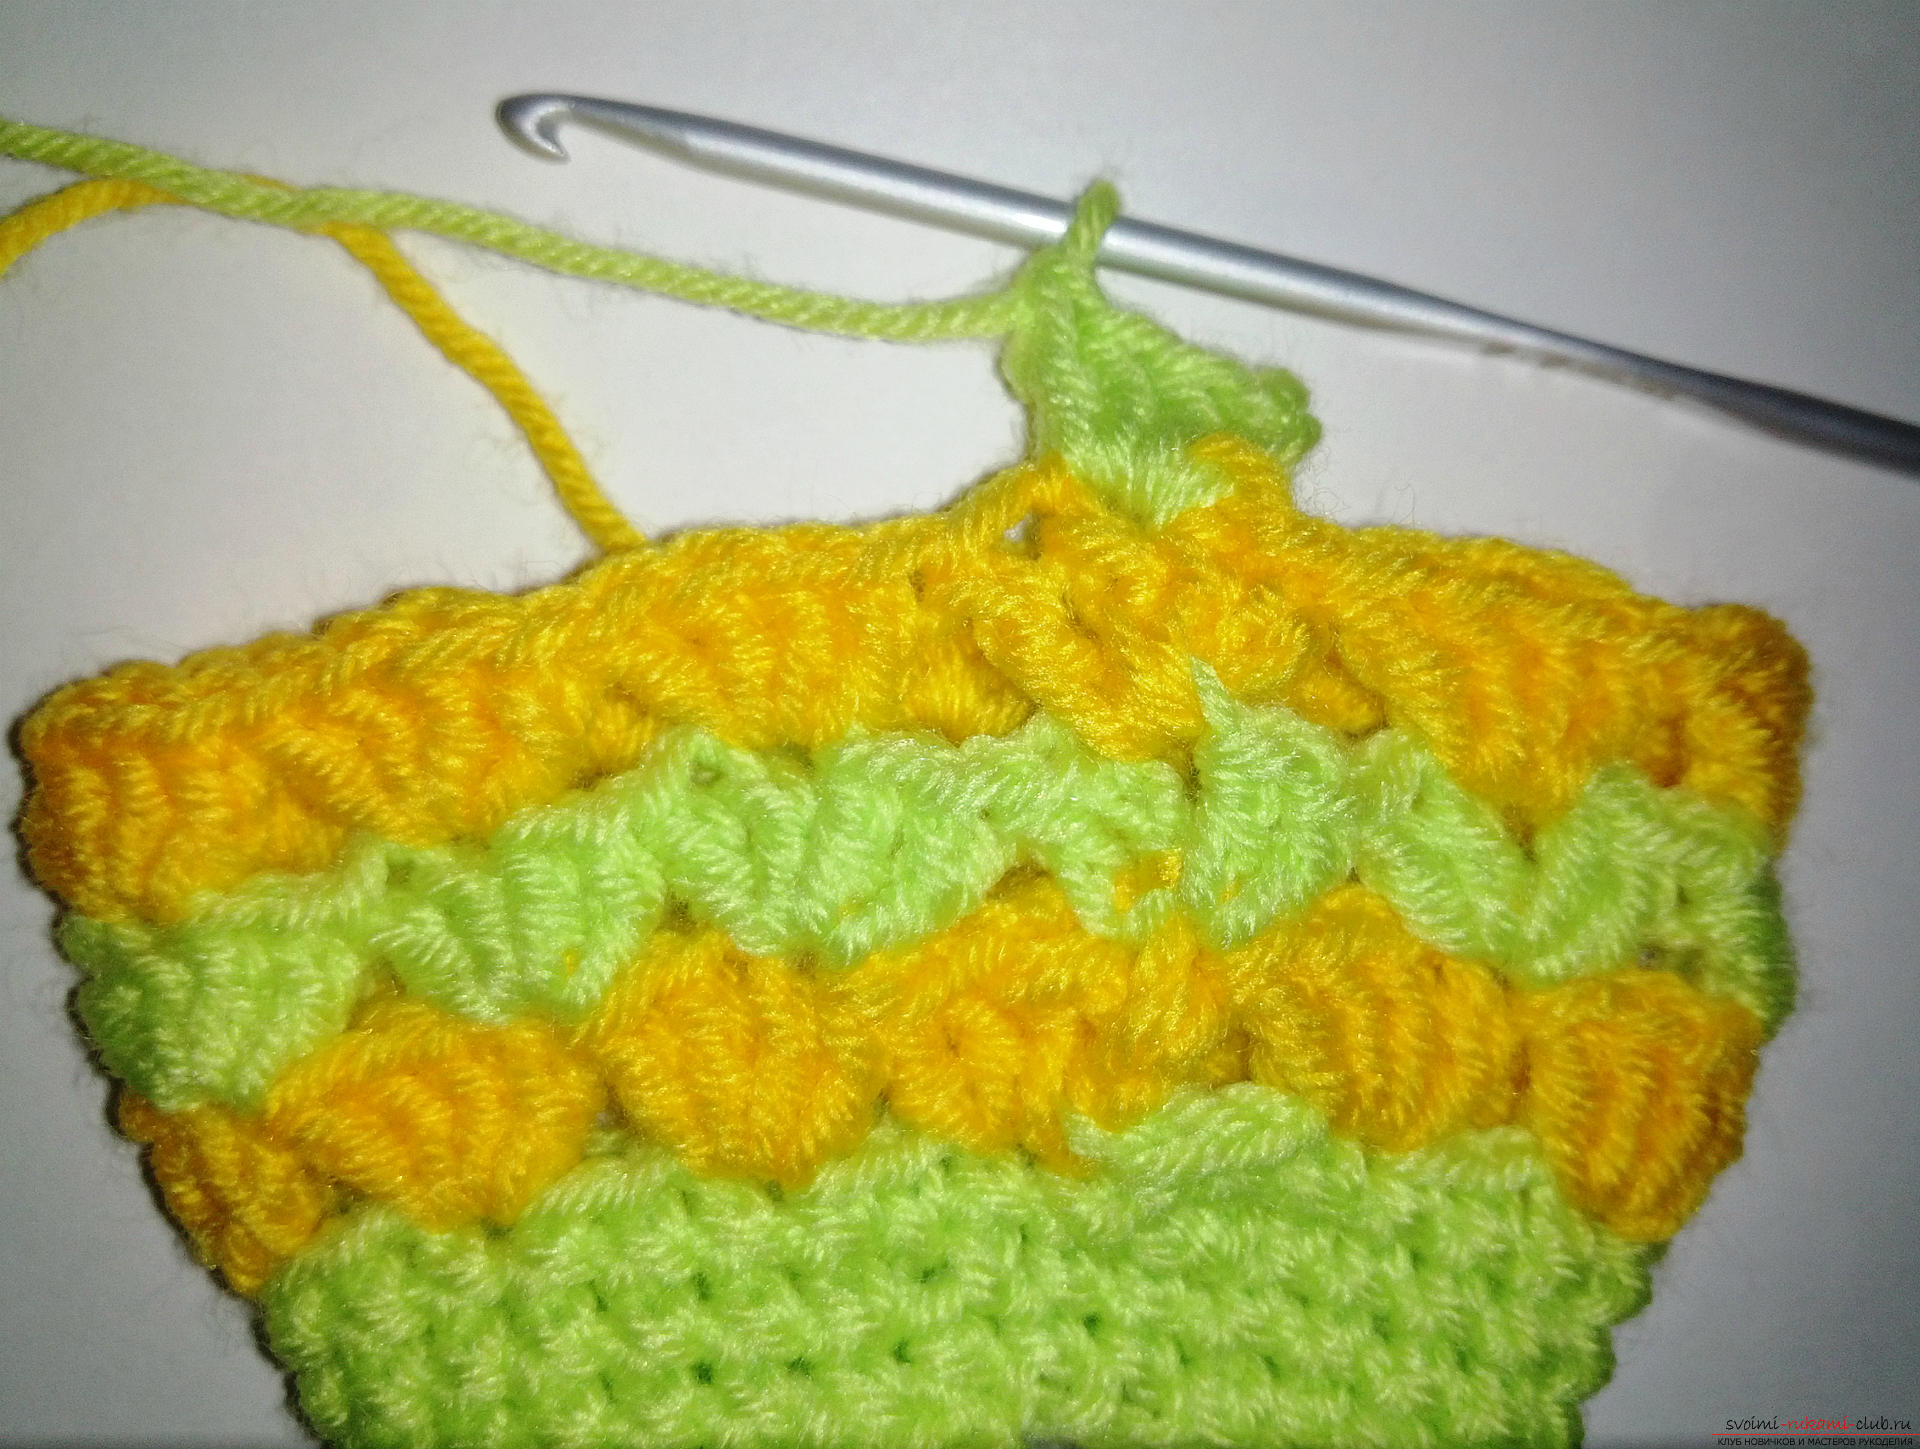 A master class with a photo and a description of the process will teach how to tie fishnet mitts crochet. Photo №7